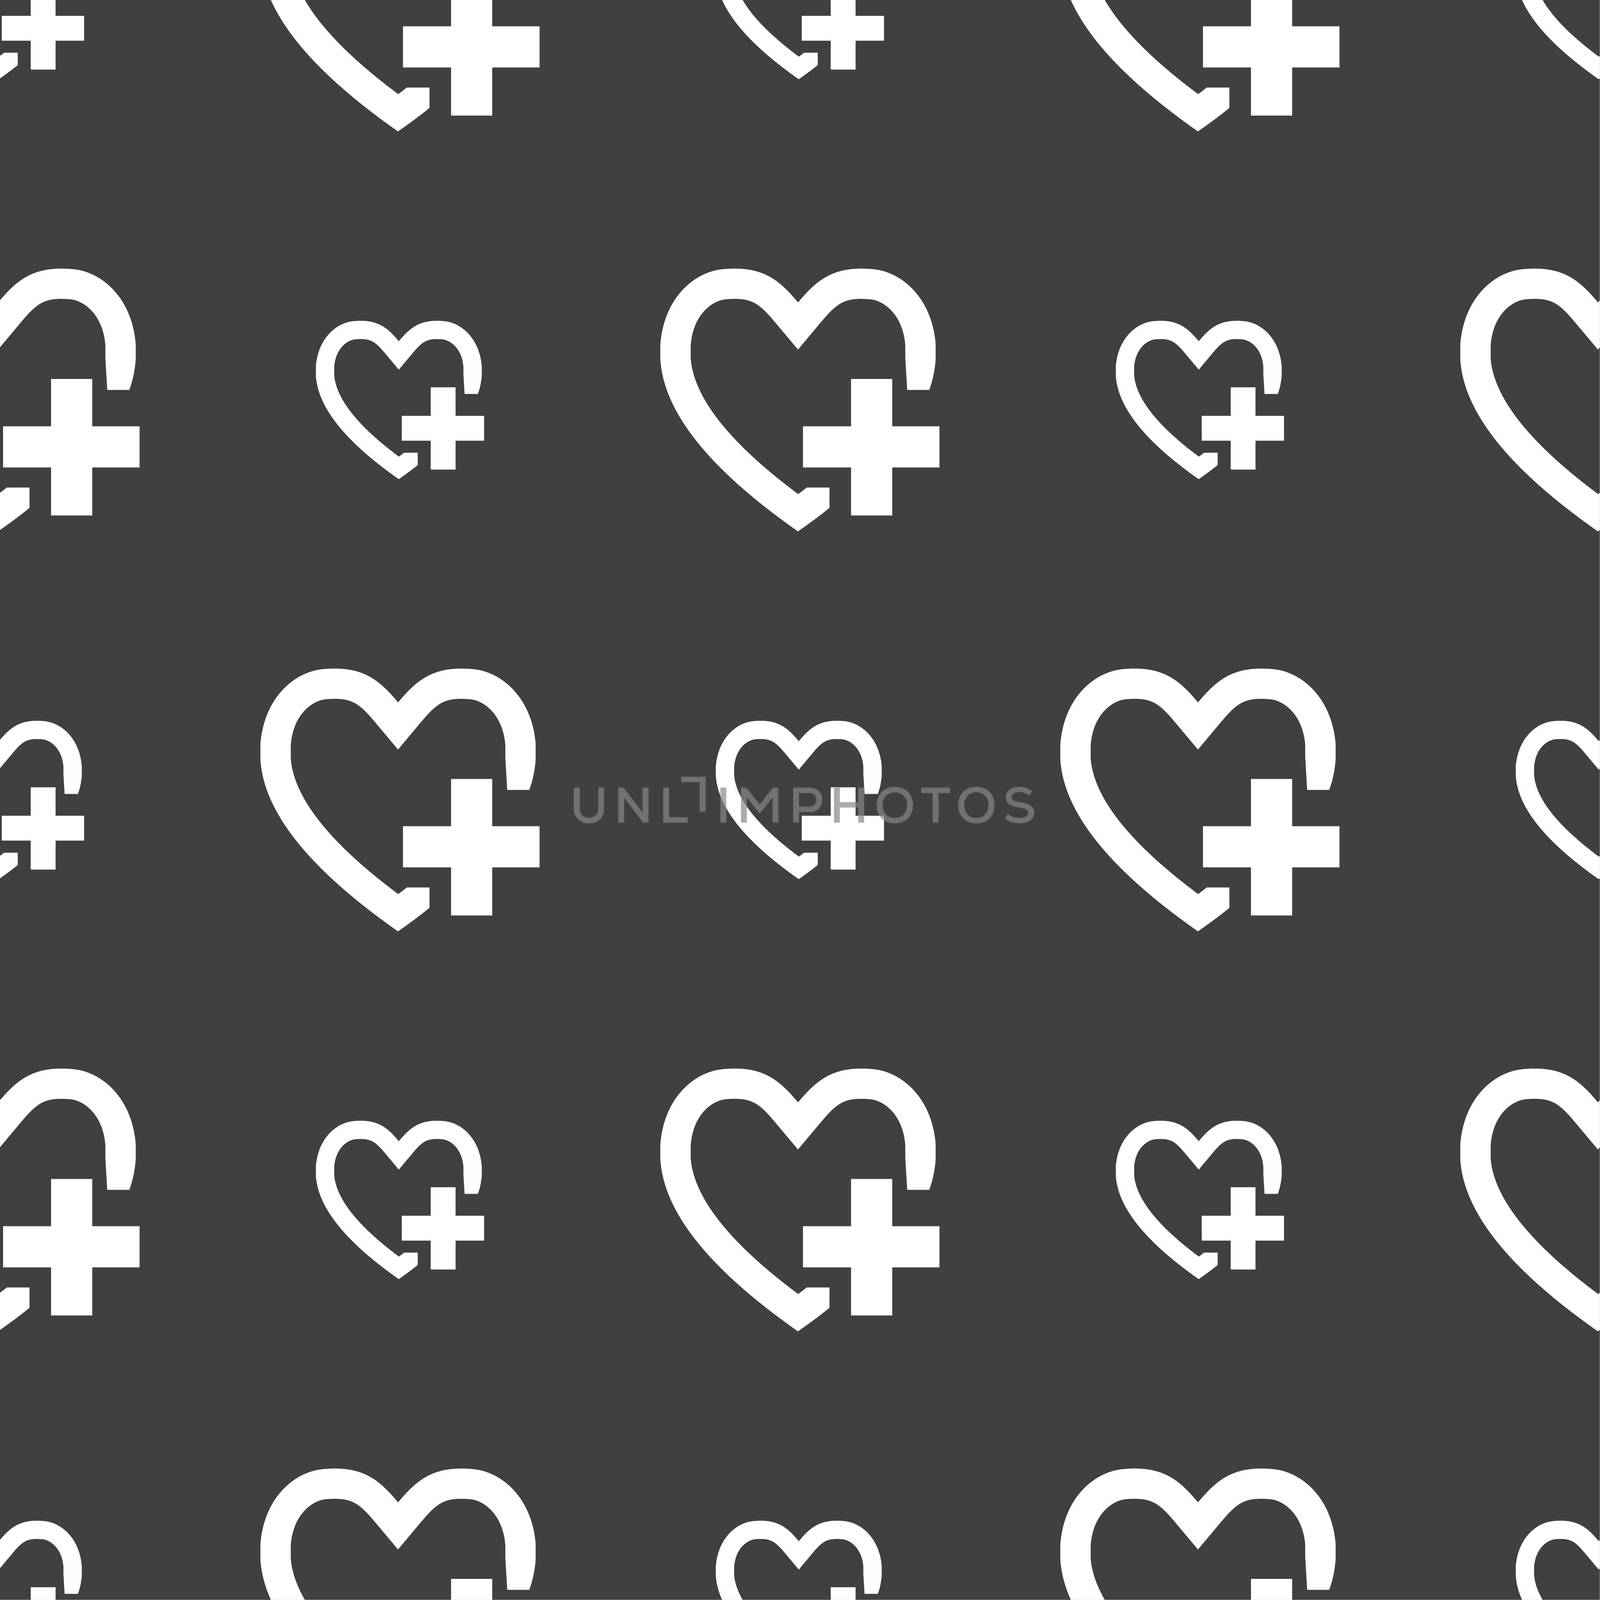 Heart sign icon. Love symbol. Seamless pattern on a gray background. illustration